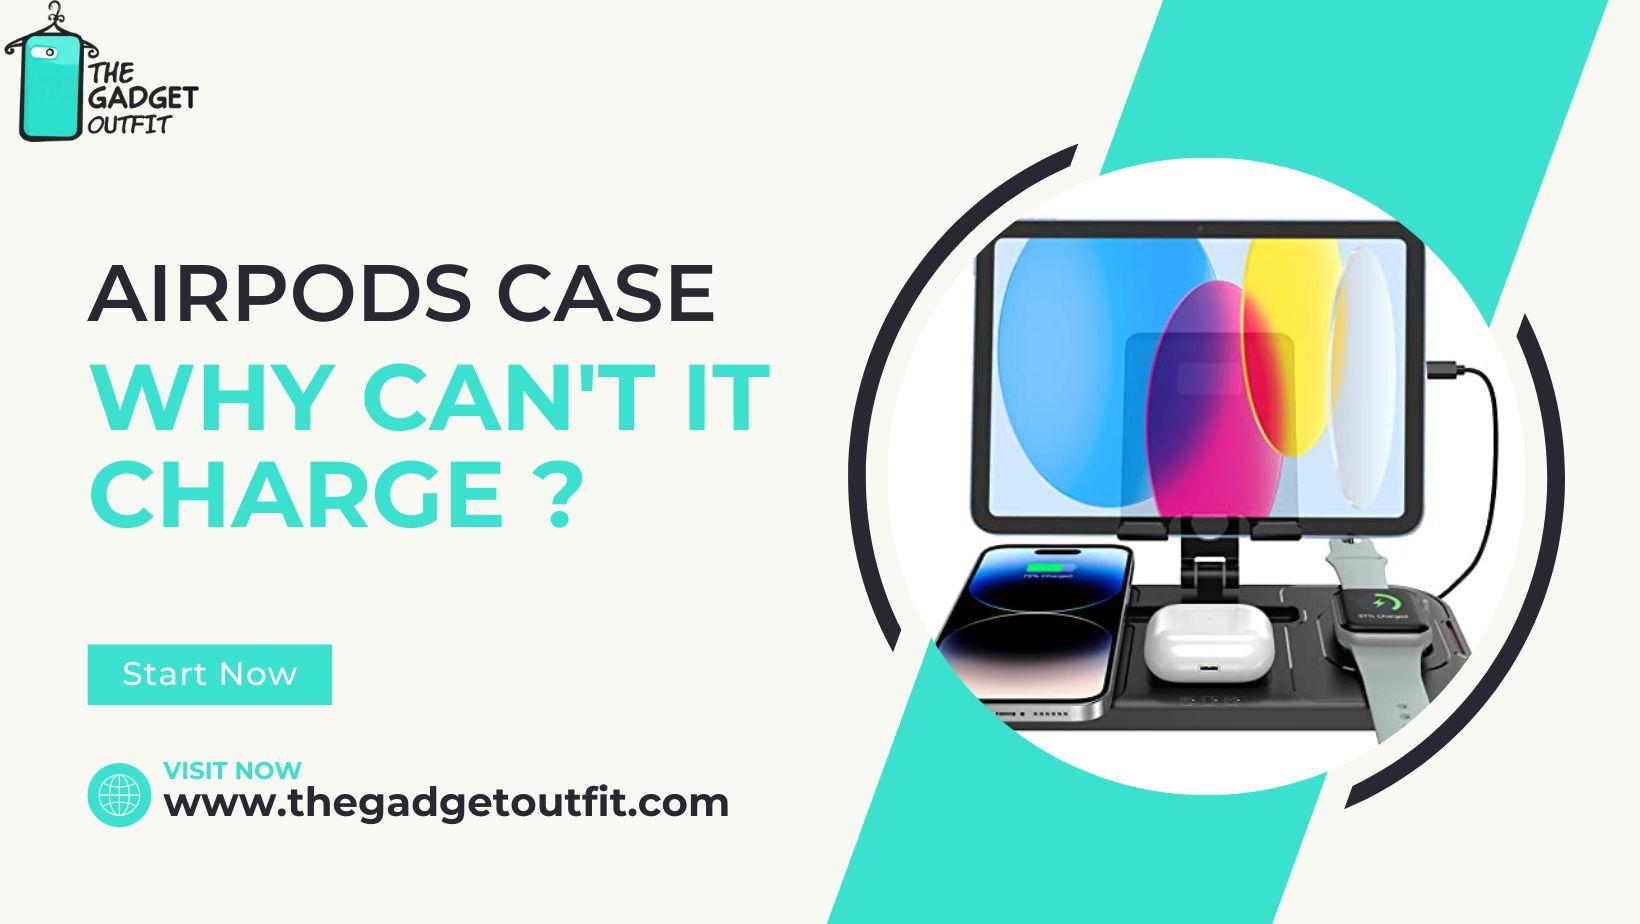 Airpods Case: Why Can't it Charge ?